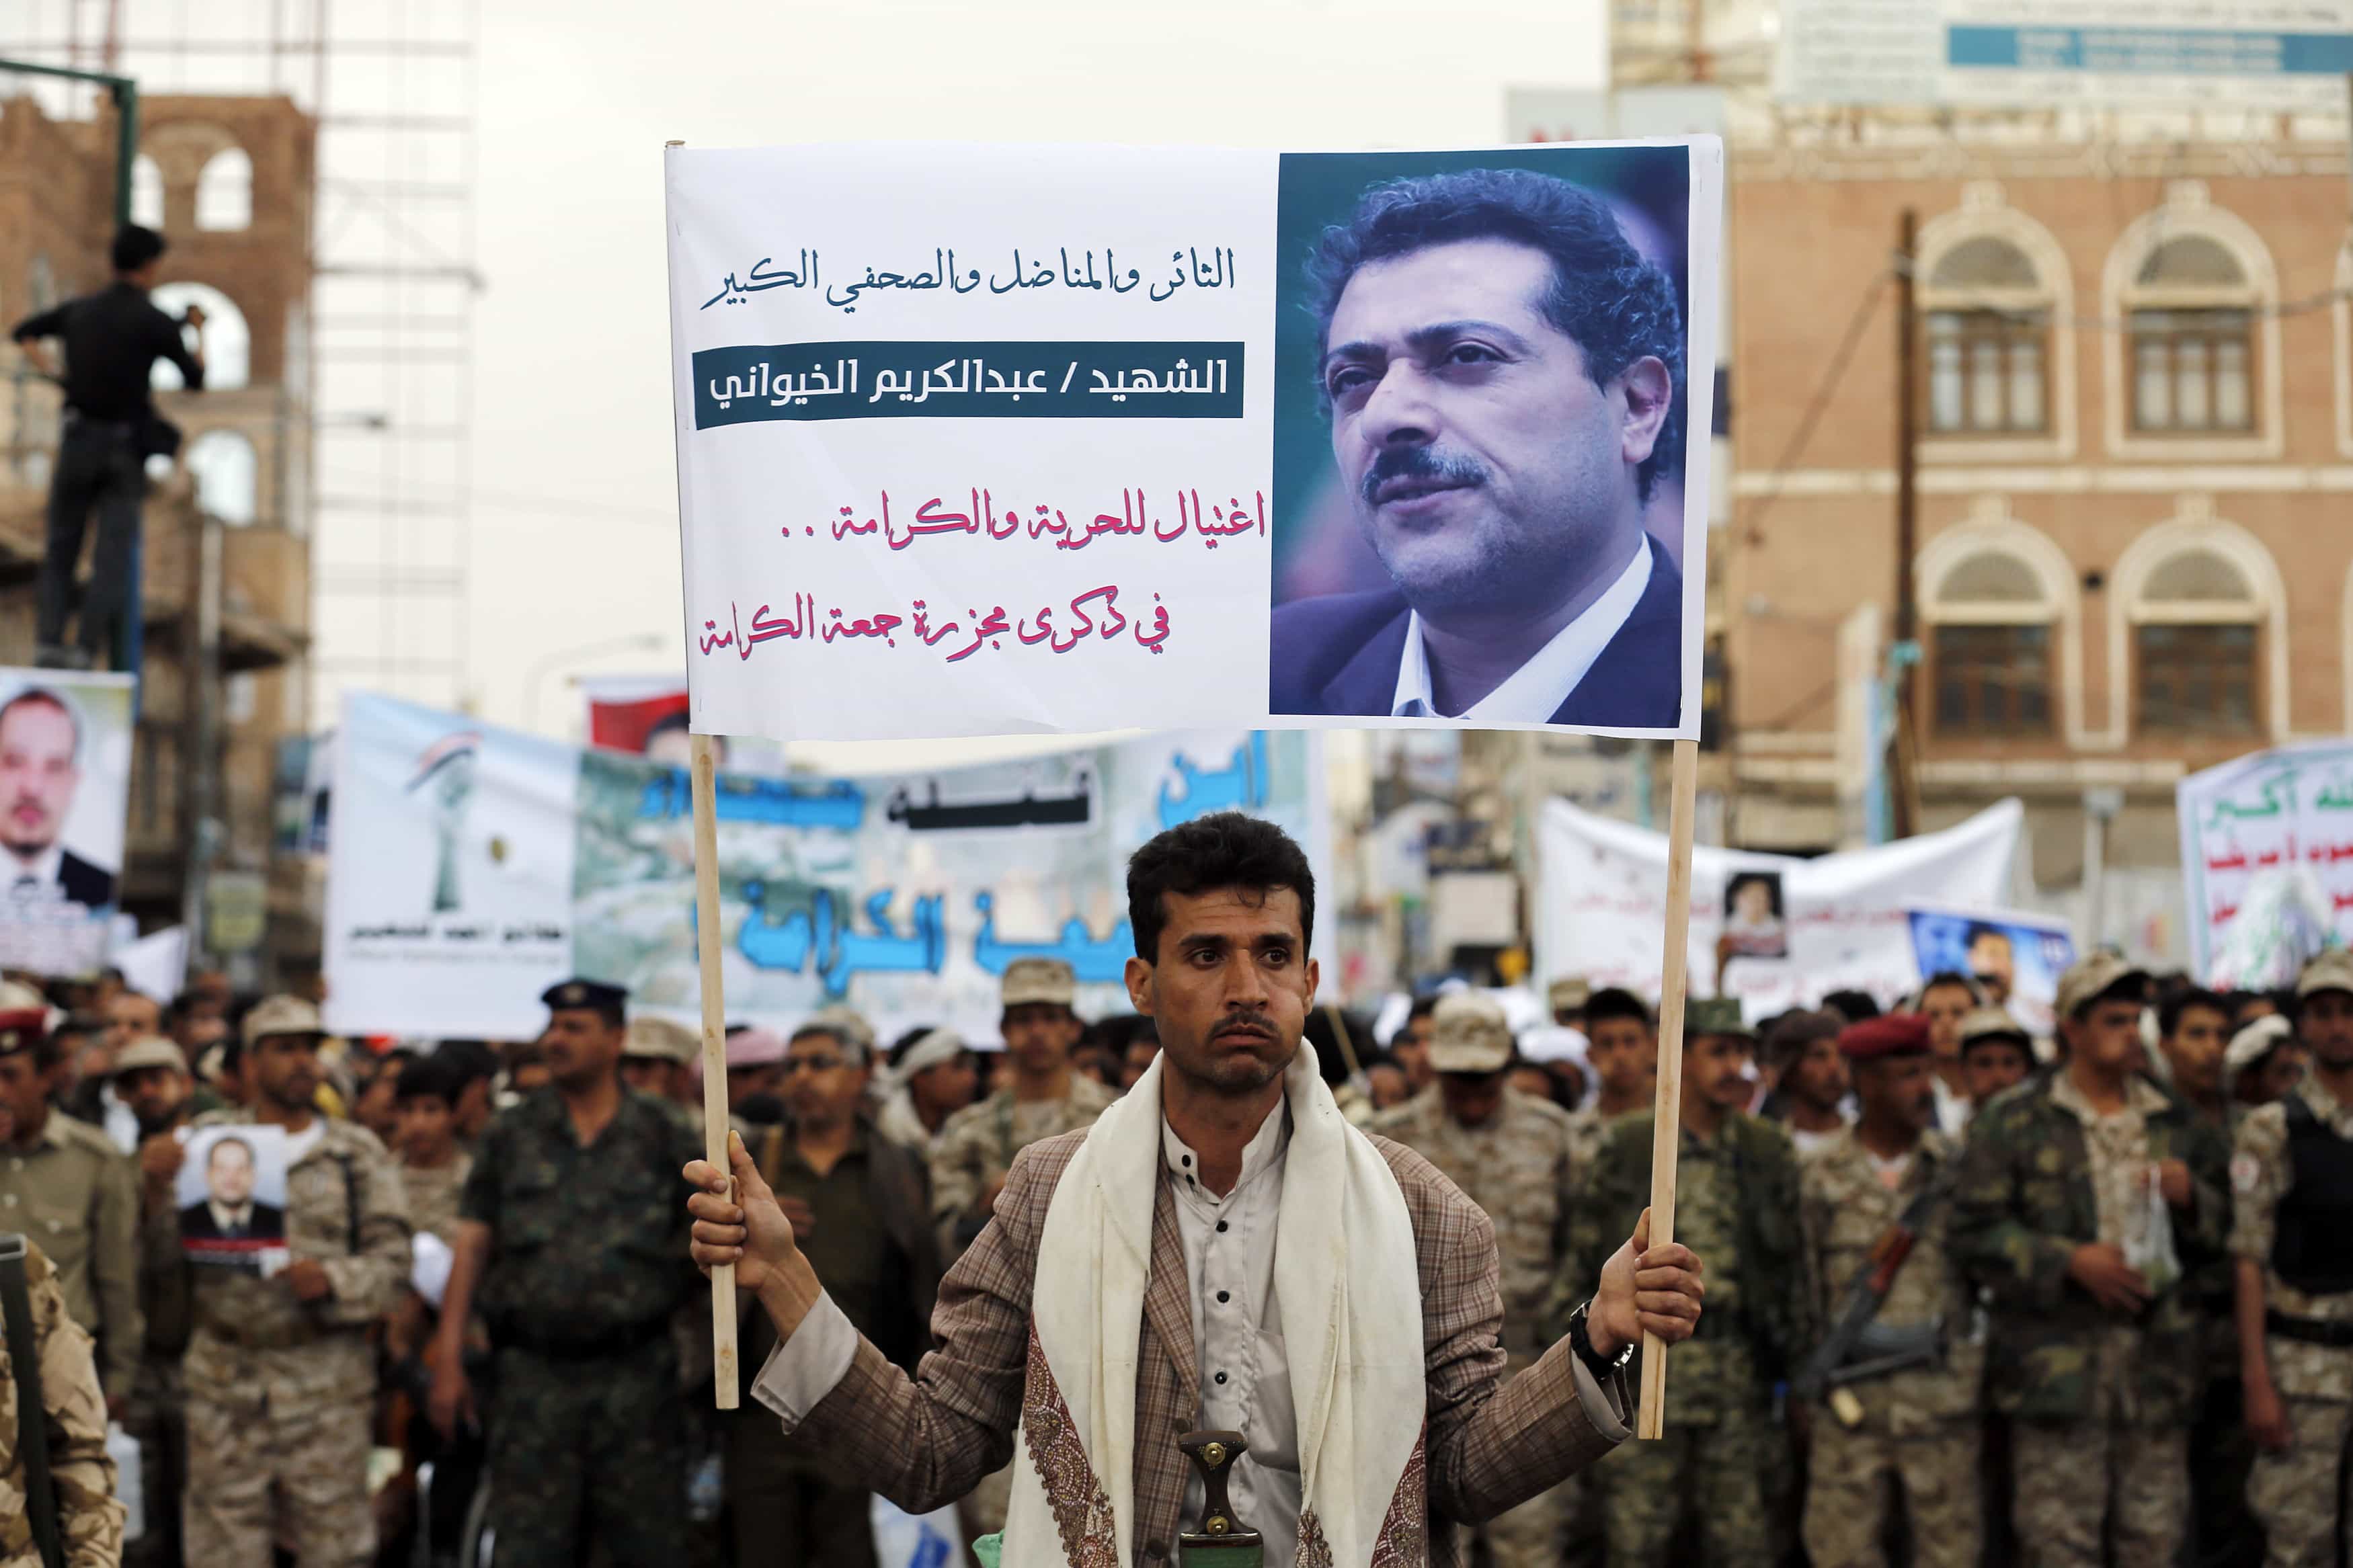 A follower of the Houthi movement holds up a banner depicting journalist Abdul Kareem al-Khaiwani during a demonstration commemorating an attack on pro-democracy protesters in Sanaa March 18, 2015, REUTERS/Khaled Abdullah